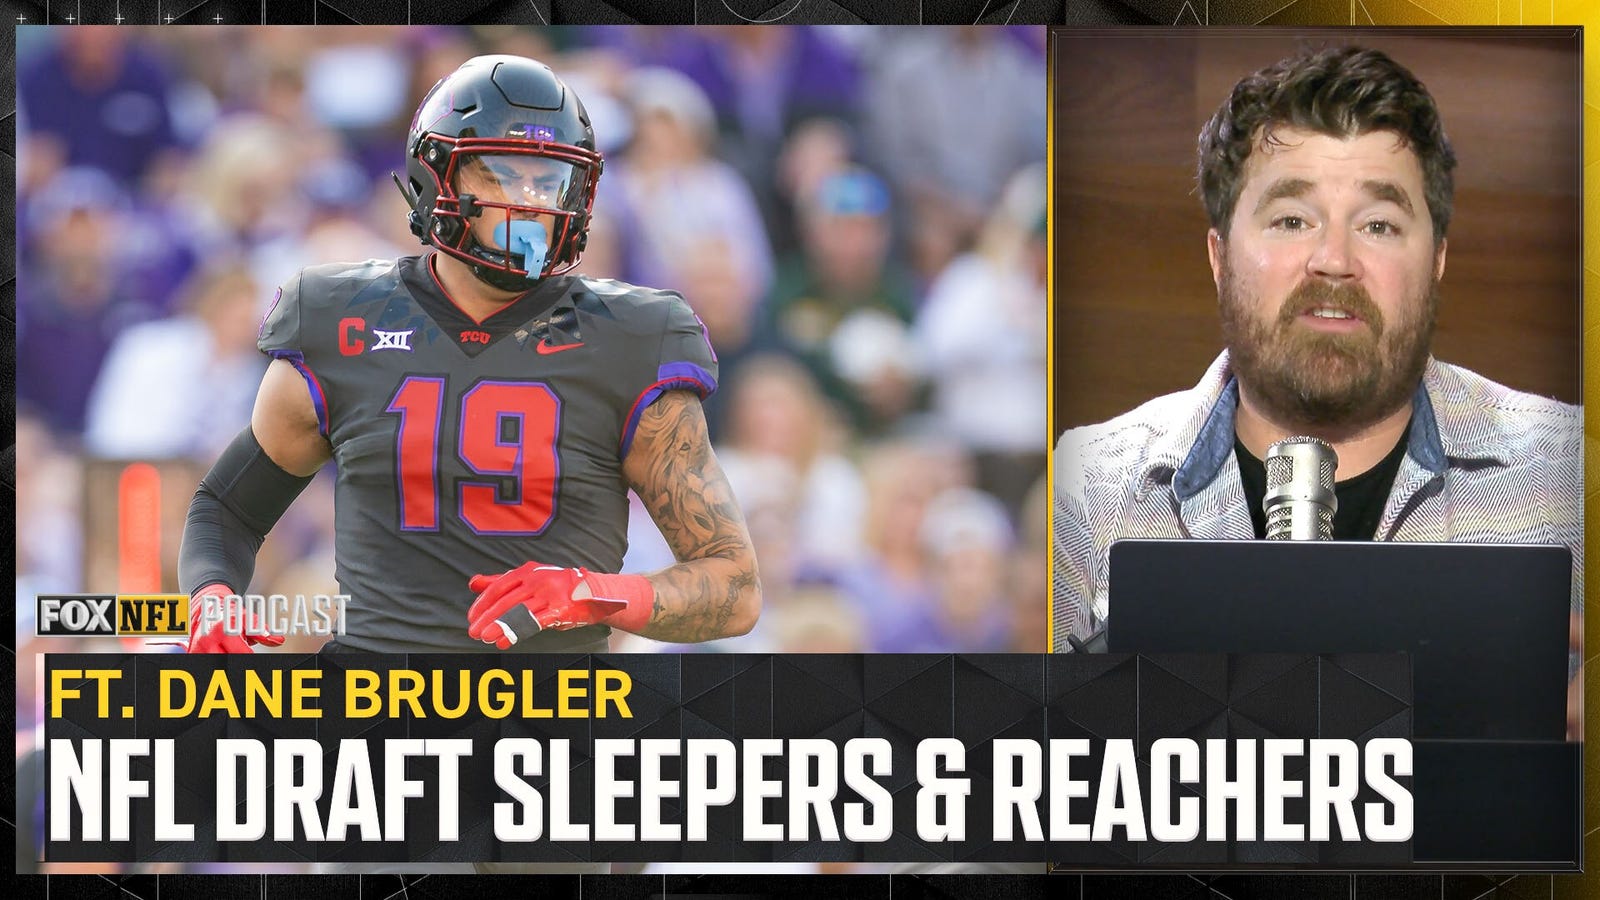 Biggest NFL Draft sleepers and reachers